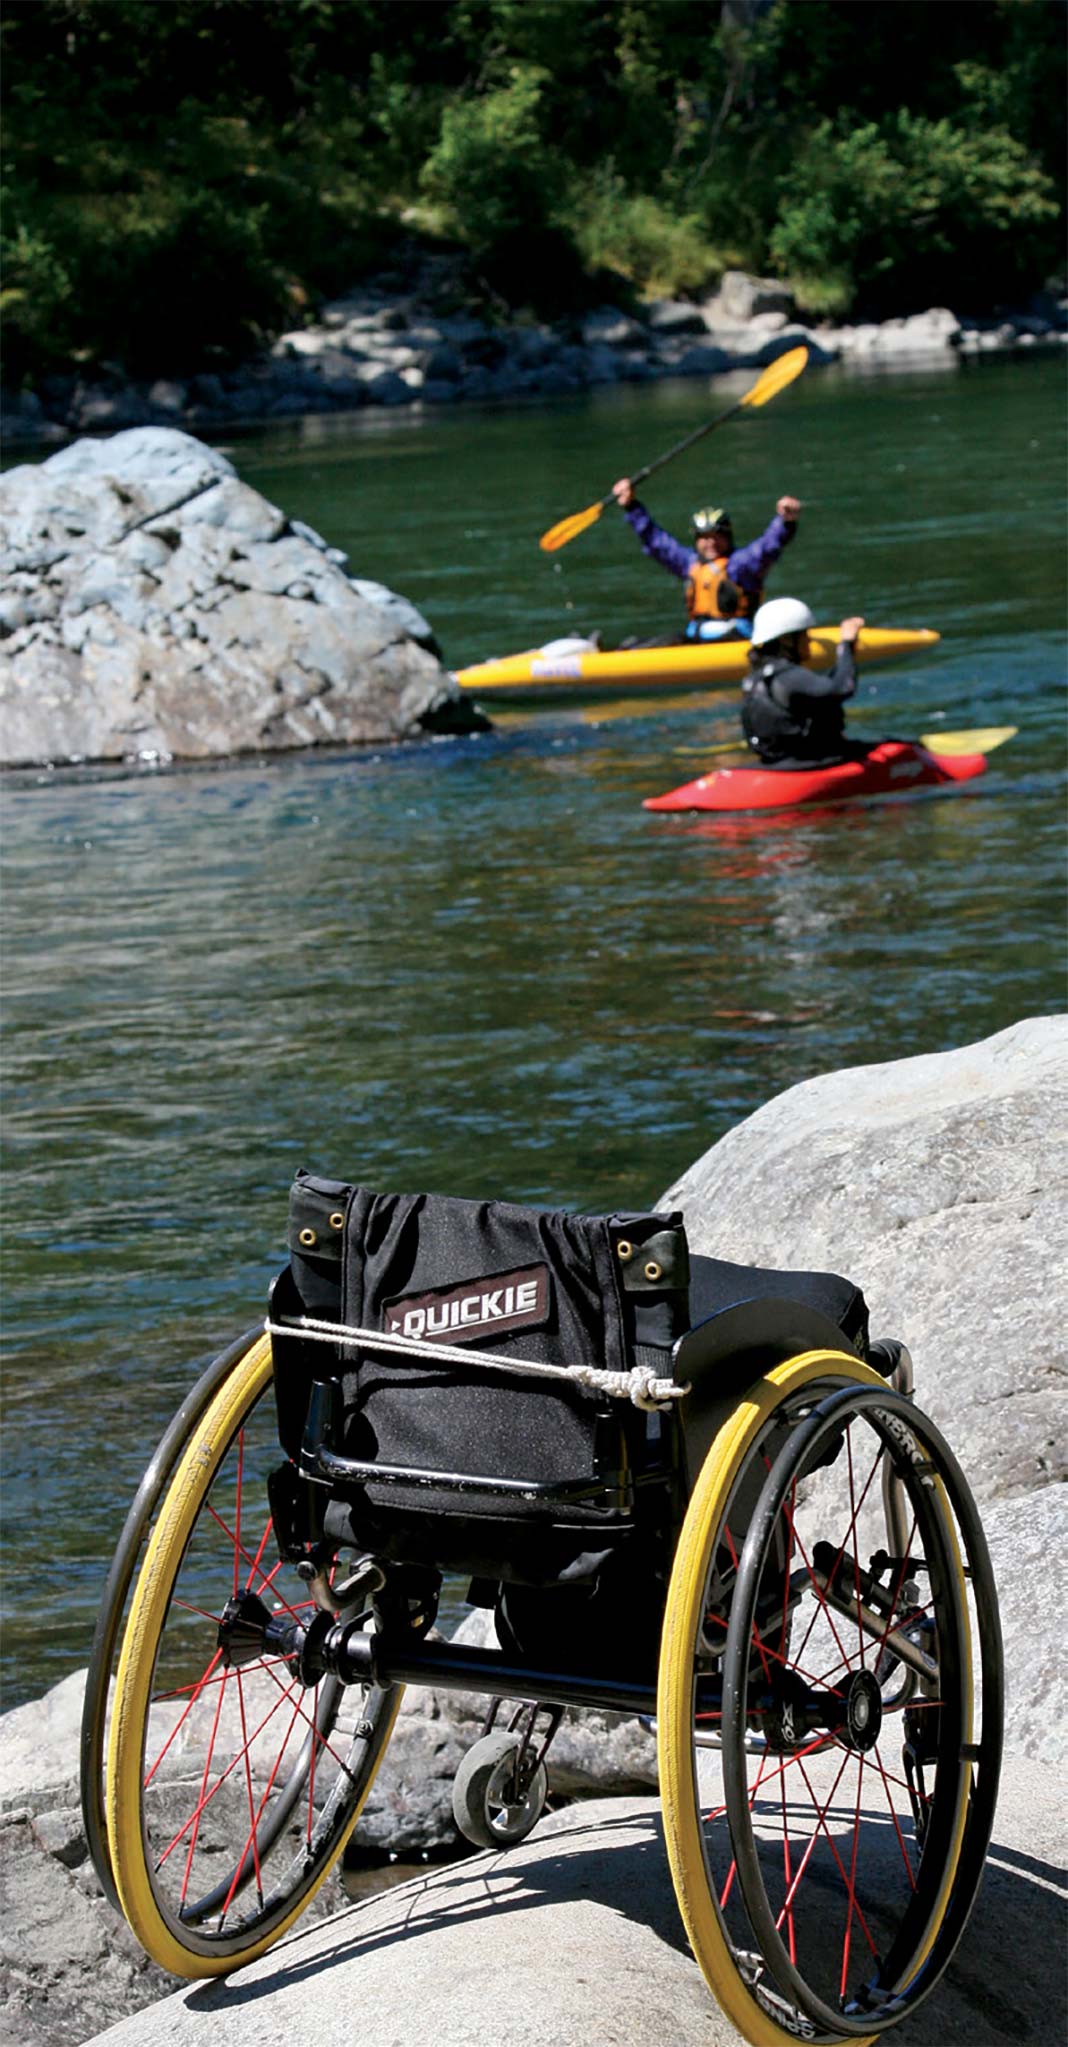 Wheelchair in foreground with two kayakers on river in background